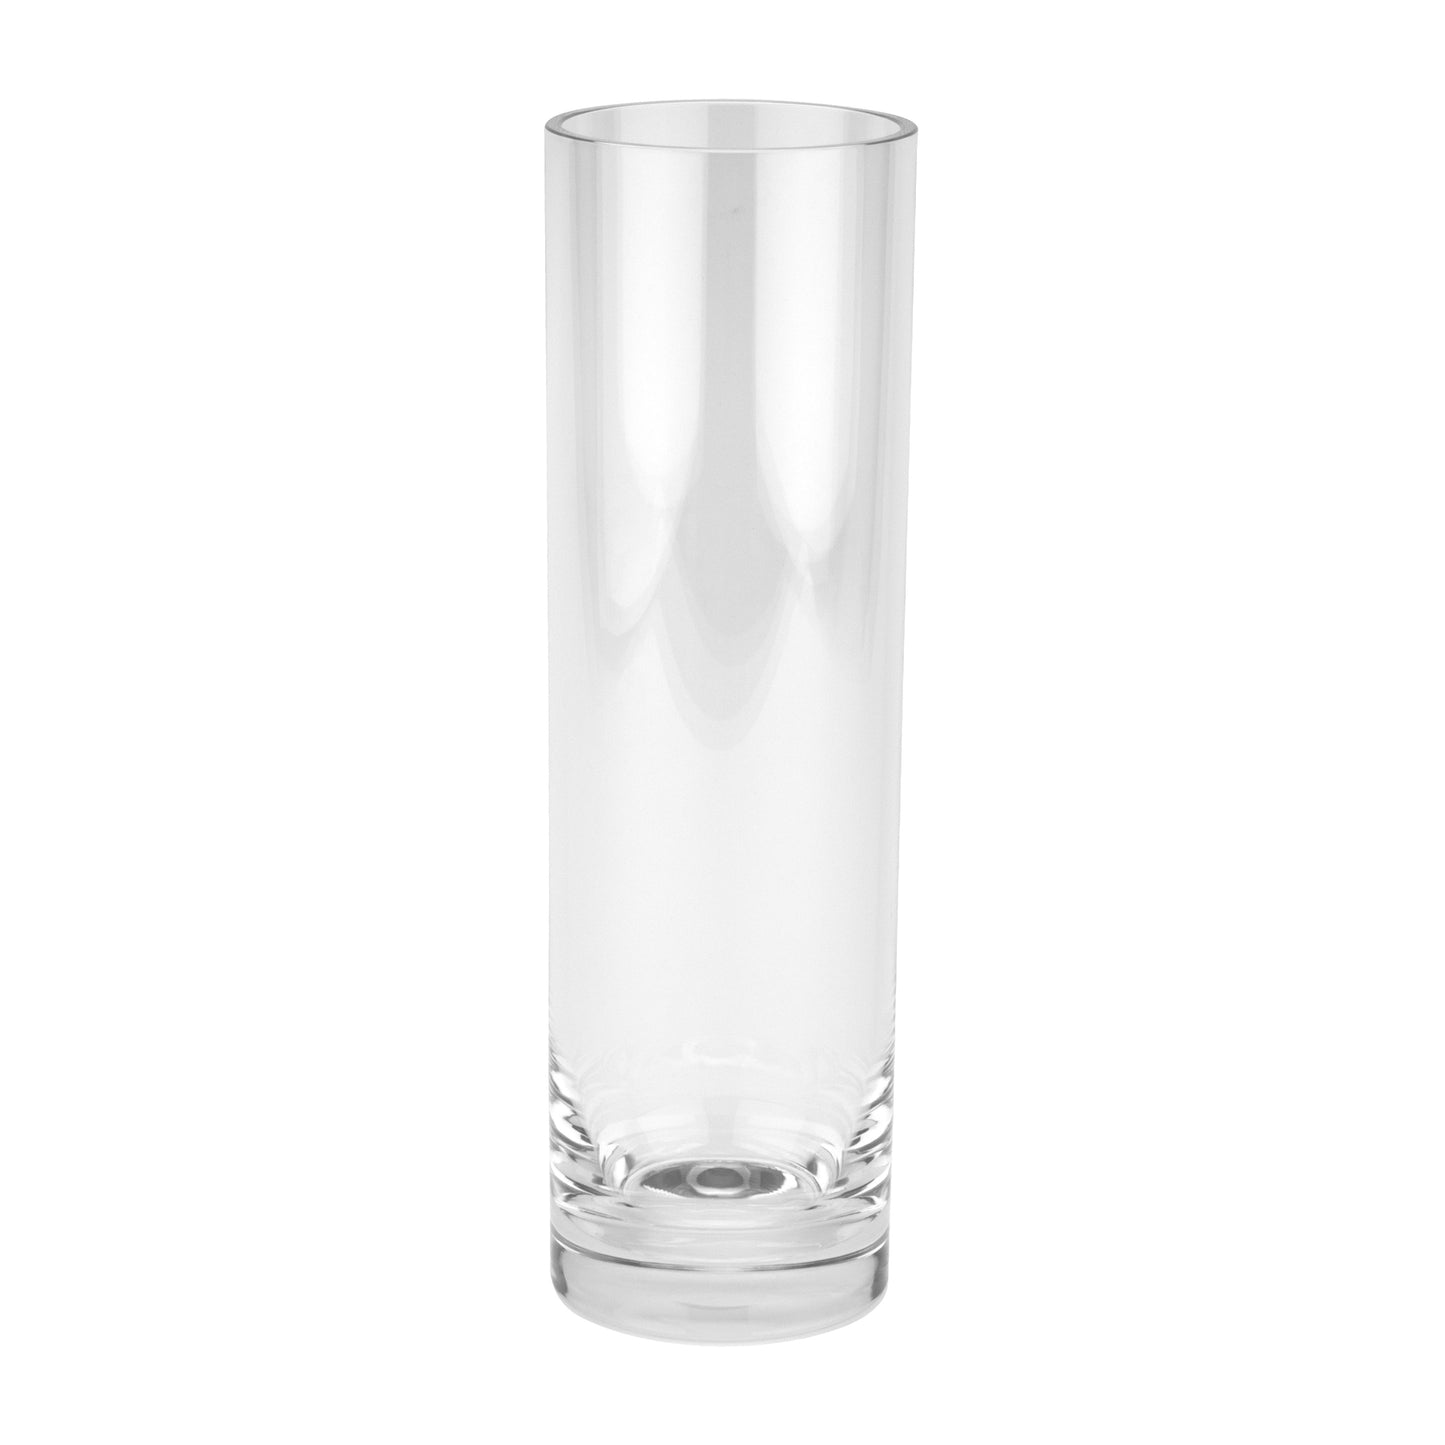 13" Tall, Tabletop, Display, Accent Vase, Break Resistant Plastic, 4" dia., G.E.T. Table Accessories